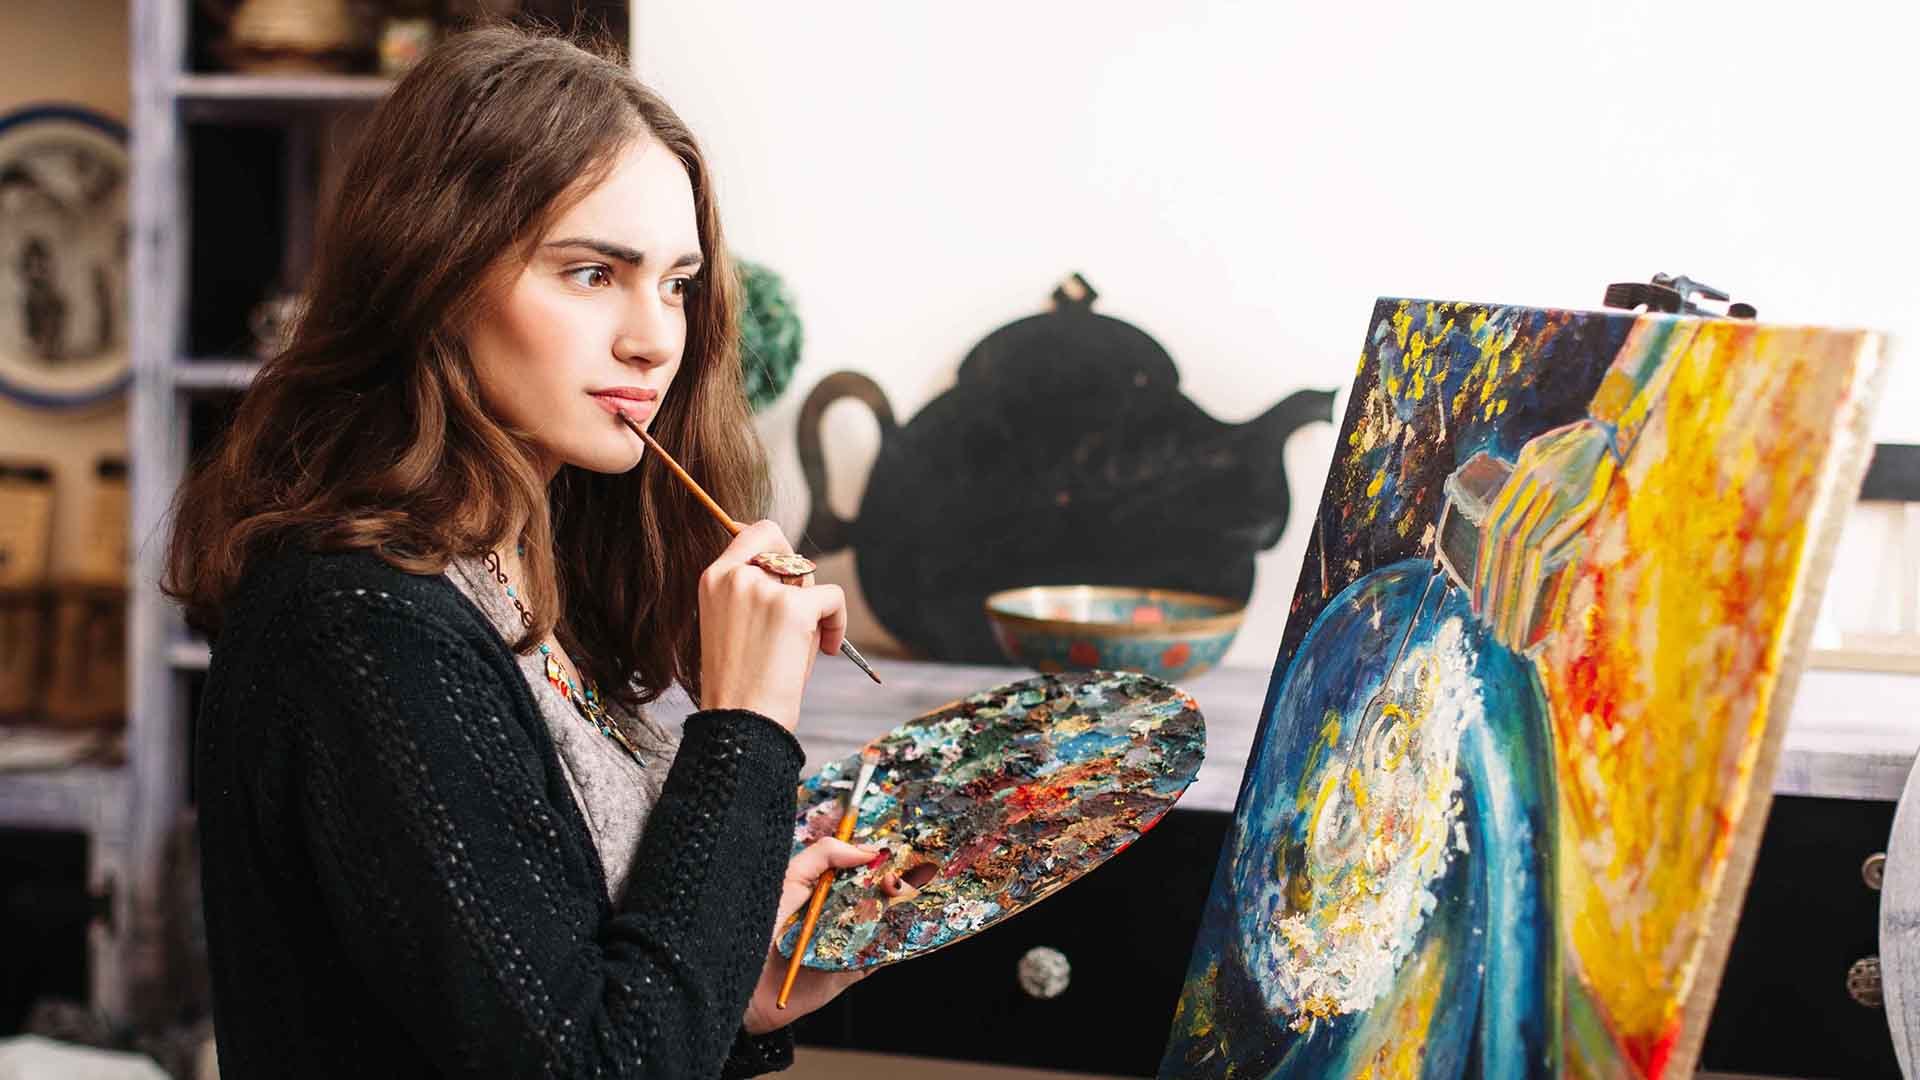 A woman holding a brush and palette in front of a painting.